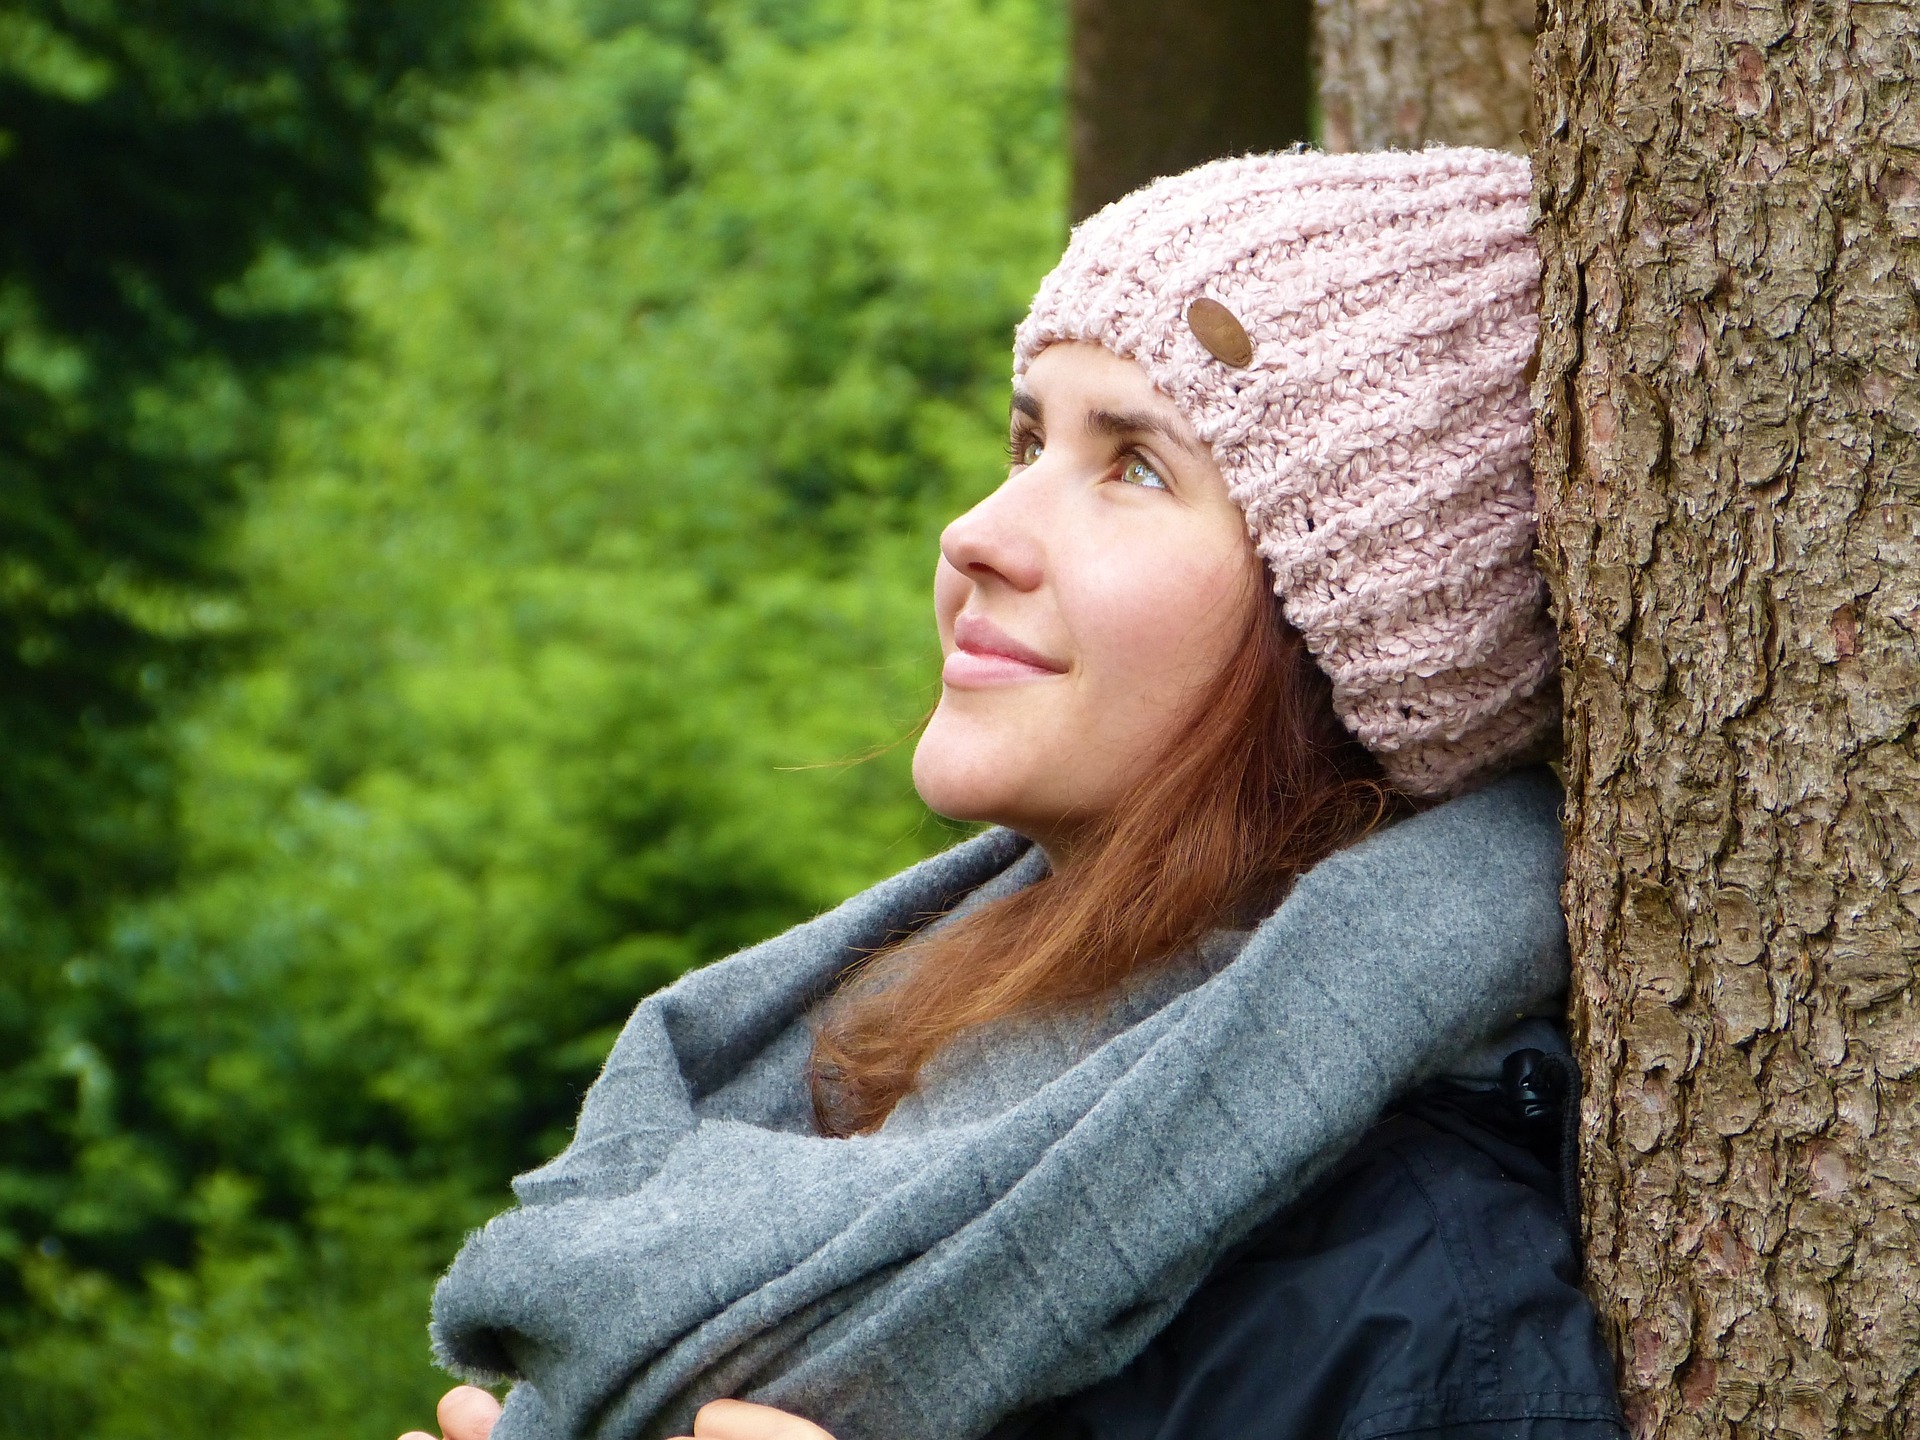 young woman leaning against tree looking up trees in background, pink sweater hat, smiling,